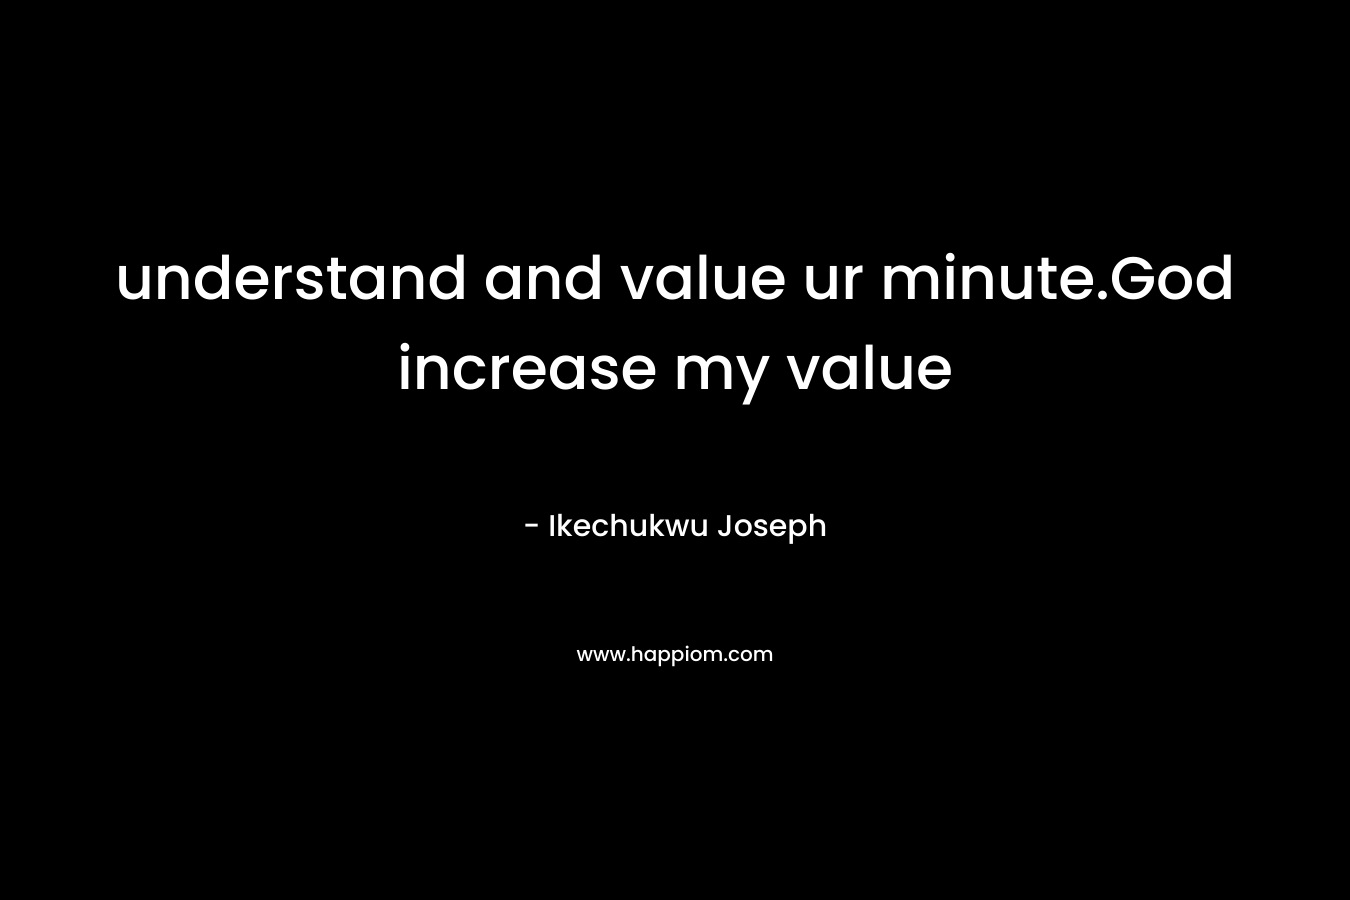 understand and value ur minute.God increase my value